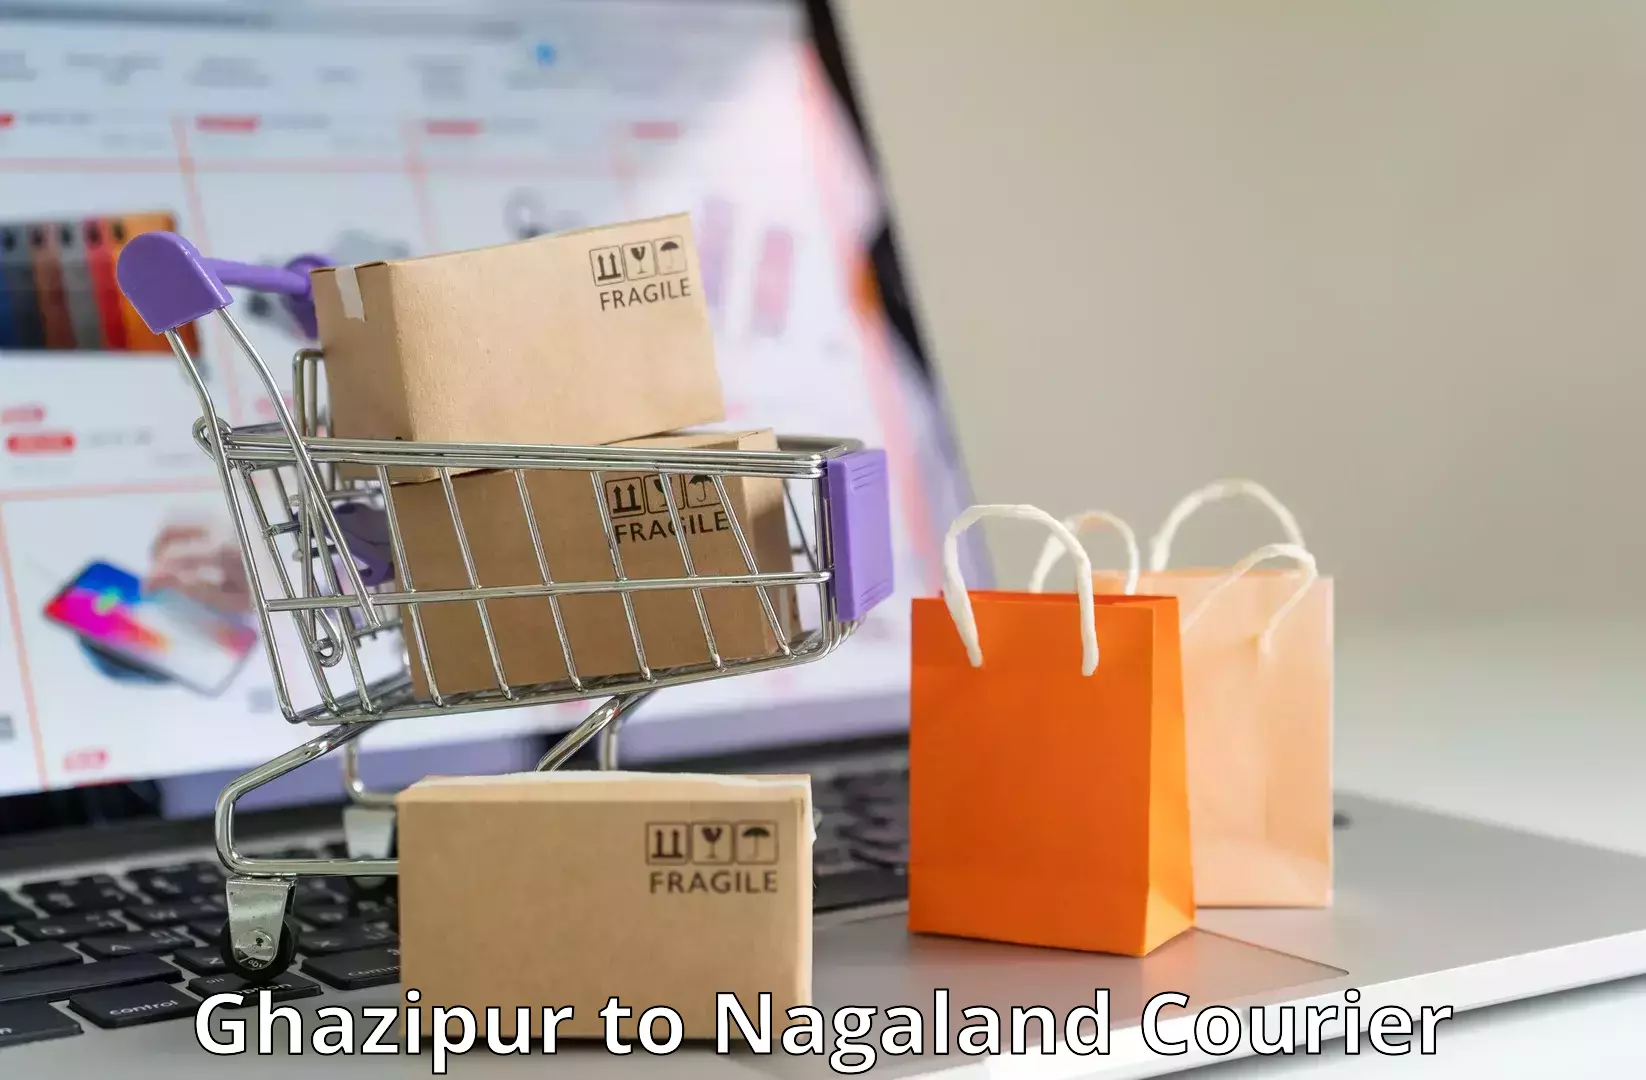 State-of-the-art courier technology Ghazipur to Dimapur